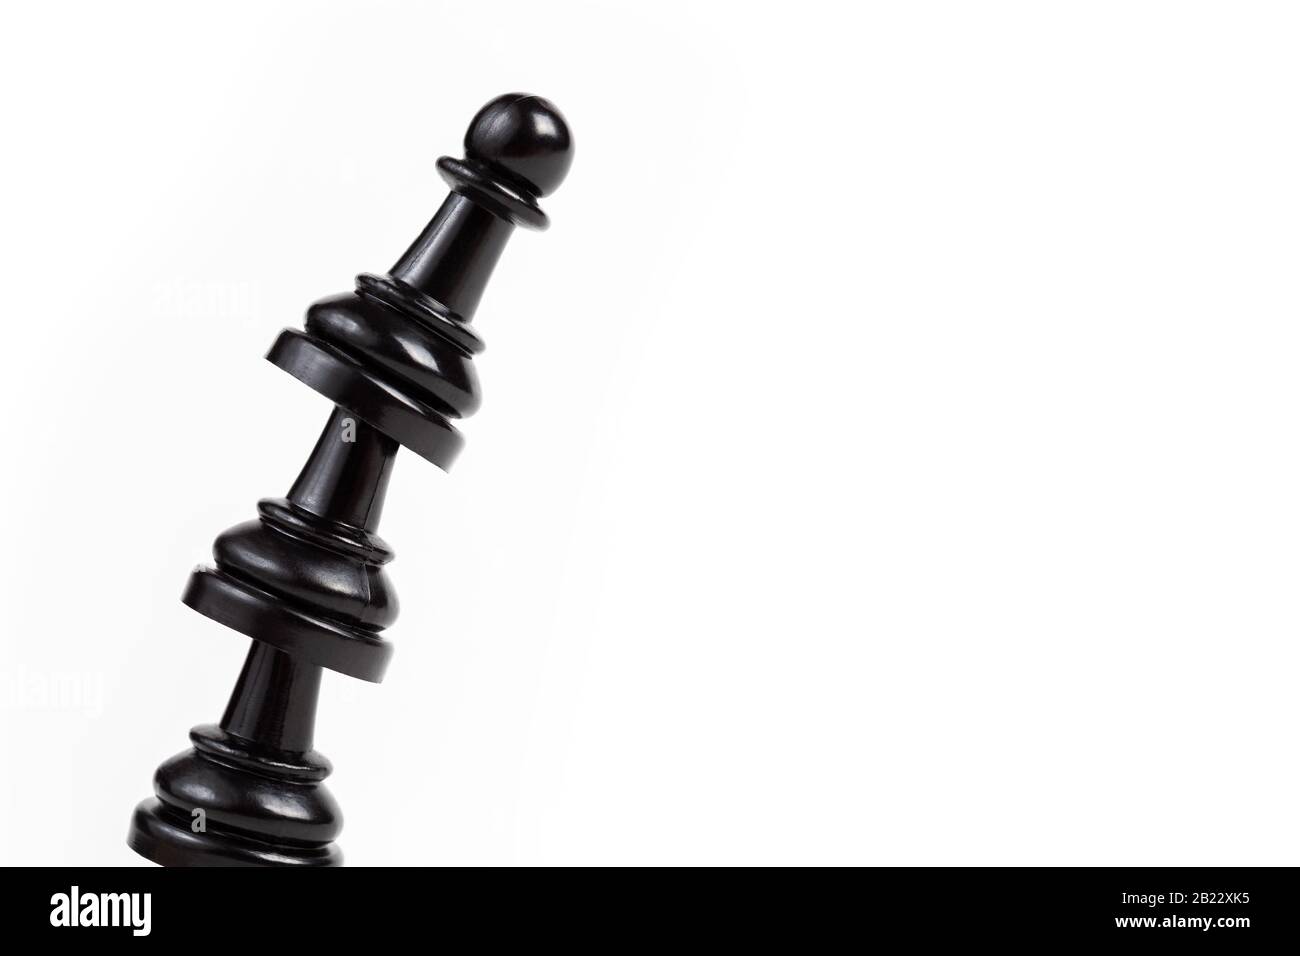 Simple leaning tower made of chess pawn pieces, curved bent construct of black game pieces placed on top of each other. Unstable shaky construction ab Stock Photo